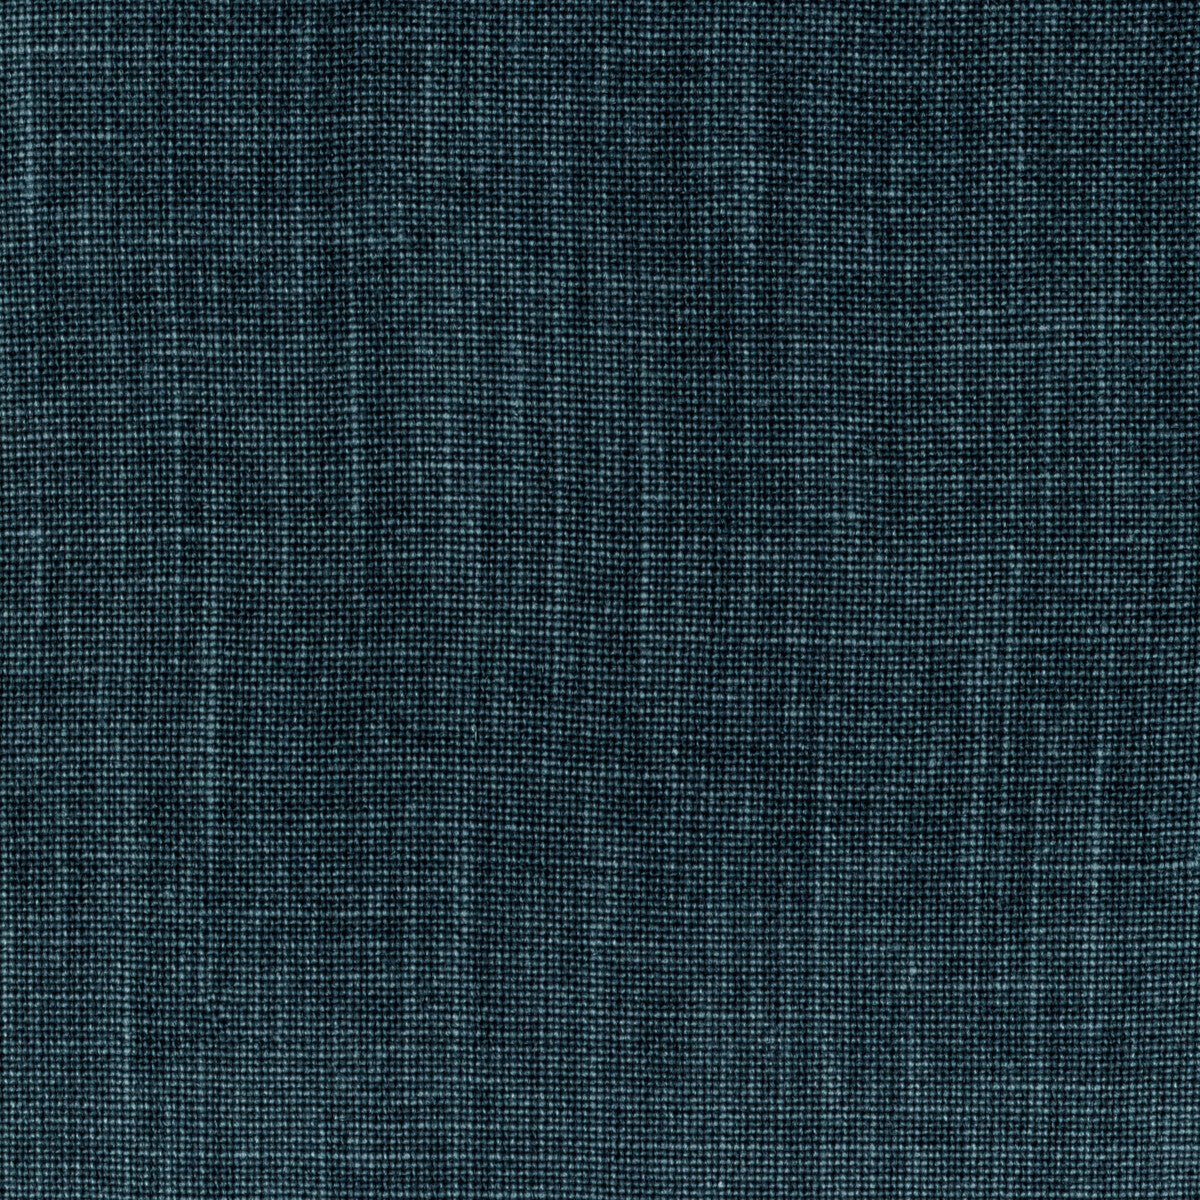 Weathered Linen fabric in indigo color - pattern BF10962.680.0 - by G P &amp; J Baker in the Baker House Linens collection